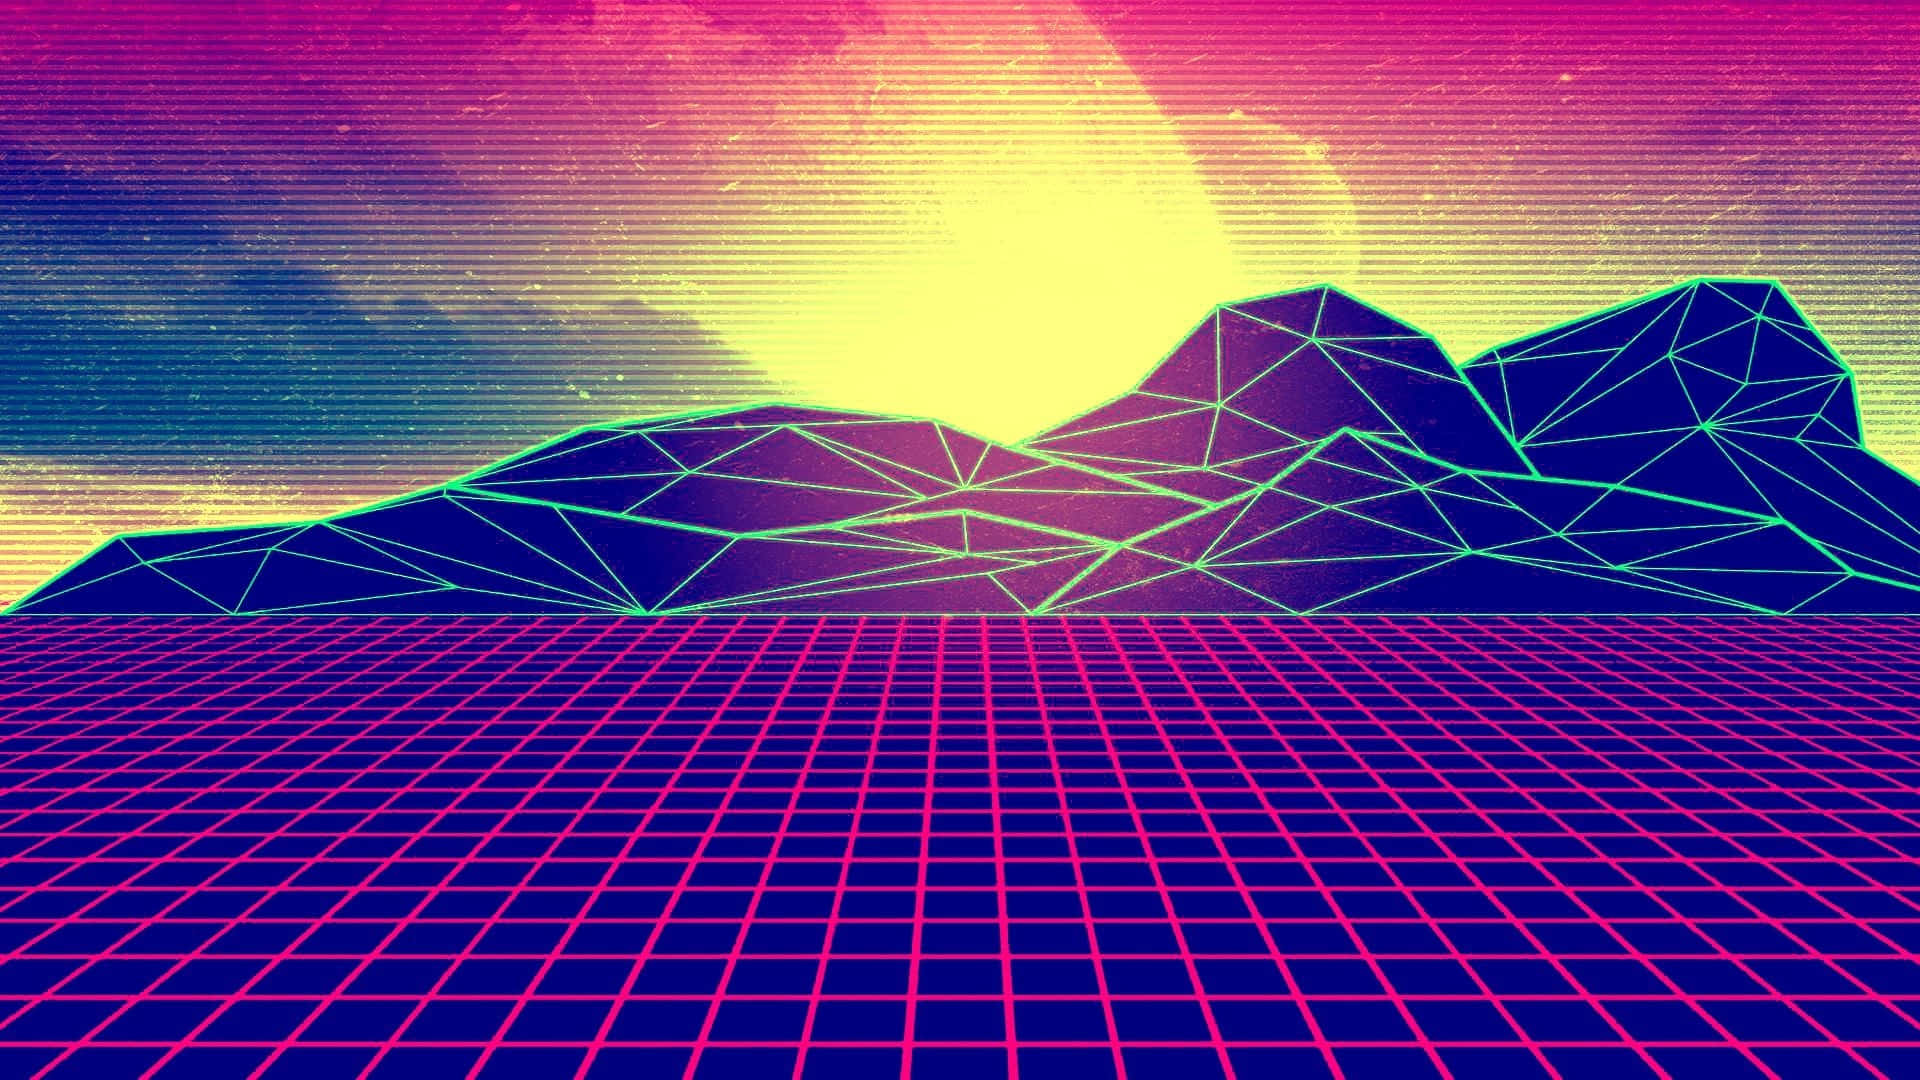 A Retro Style Background With Mountains And A Sunset